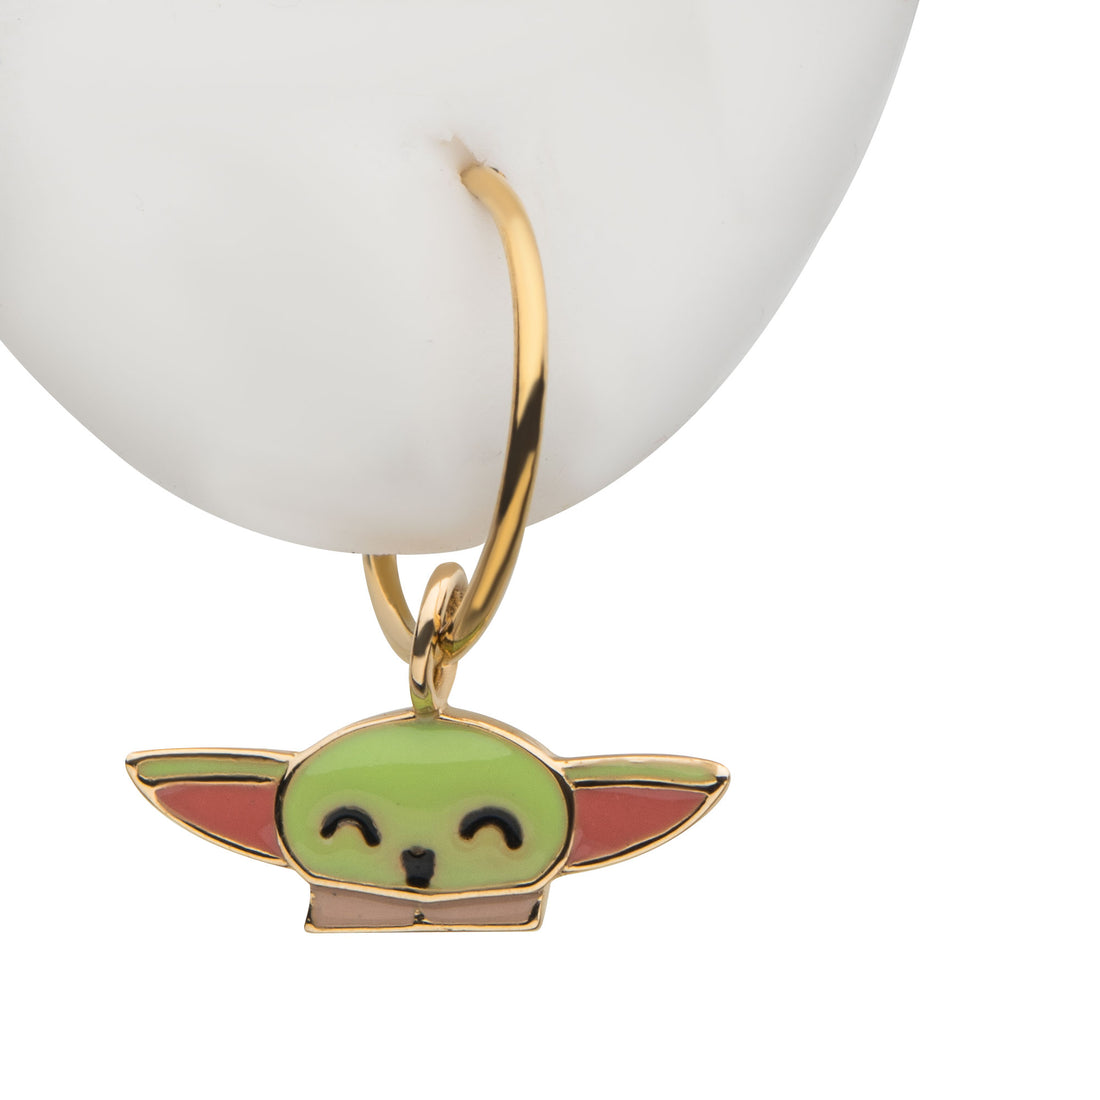 14Kt Gold with Enamel Star Wars Grogu The Child Charm